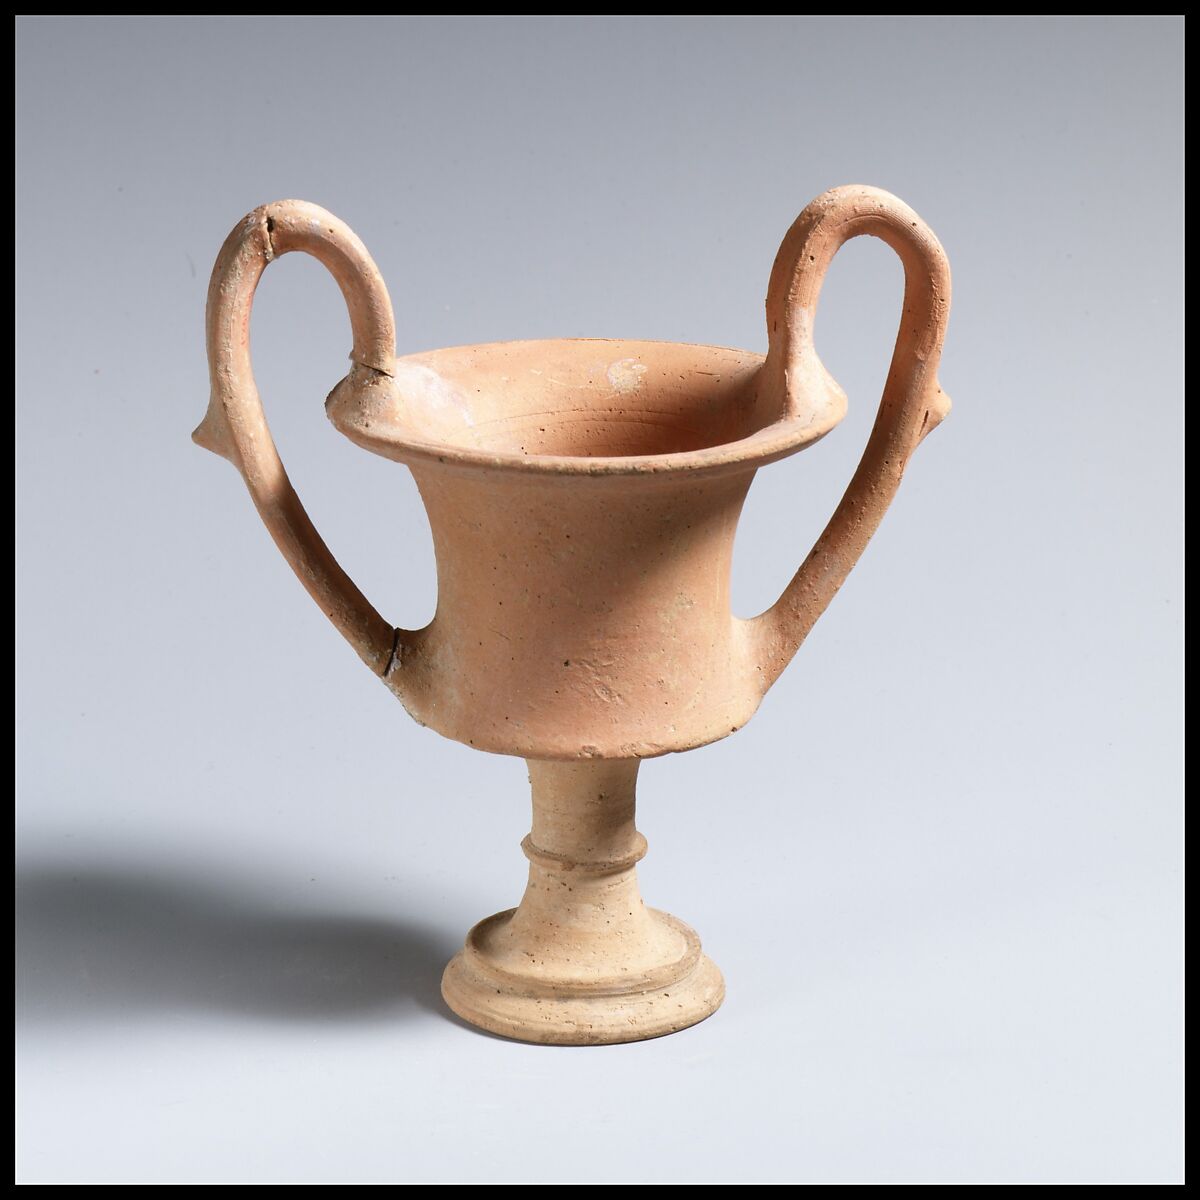 Terracotta kantharos (drinking cup with high handles), Terracotta, Greek, South Italian, Apulian 